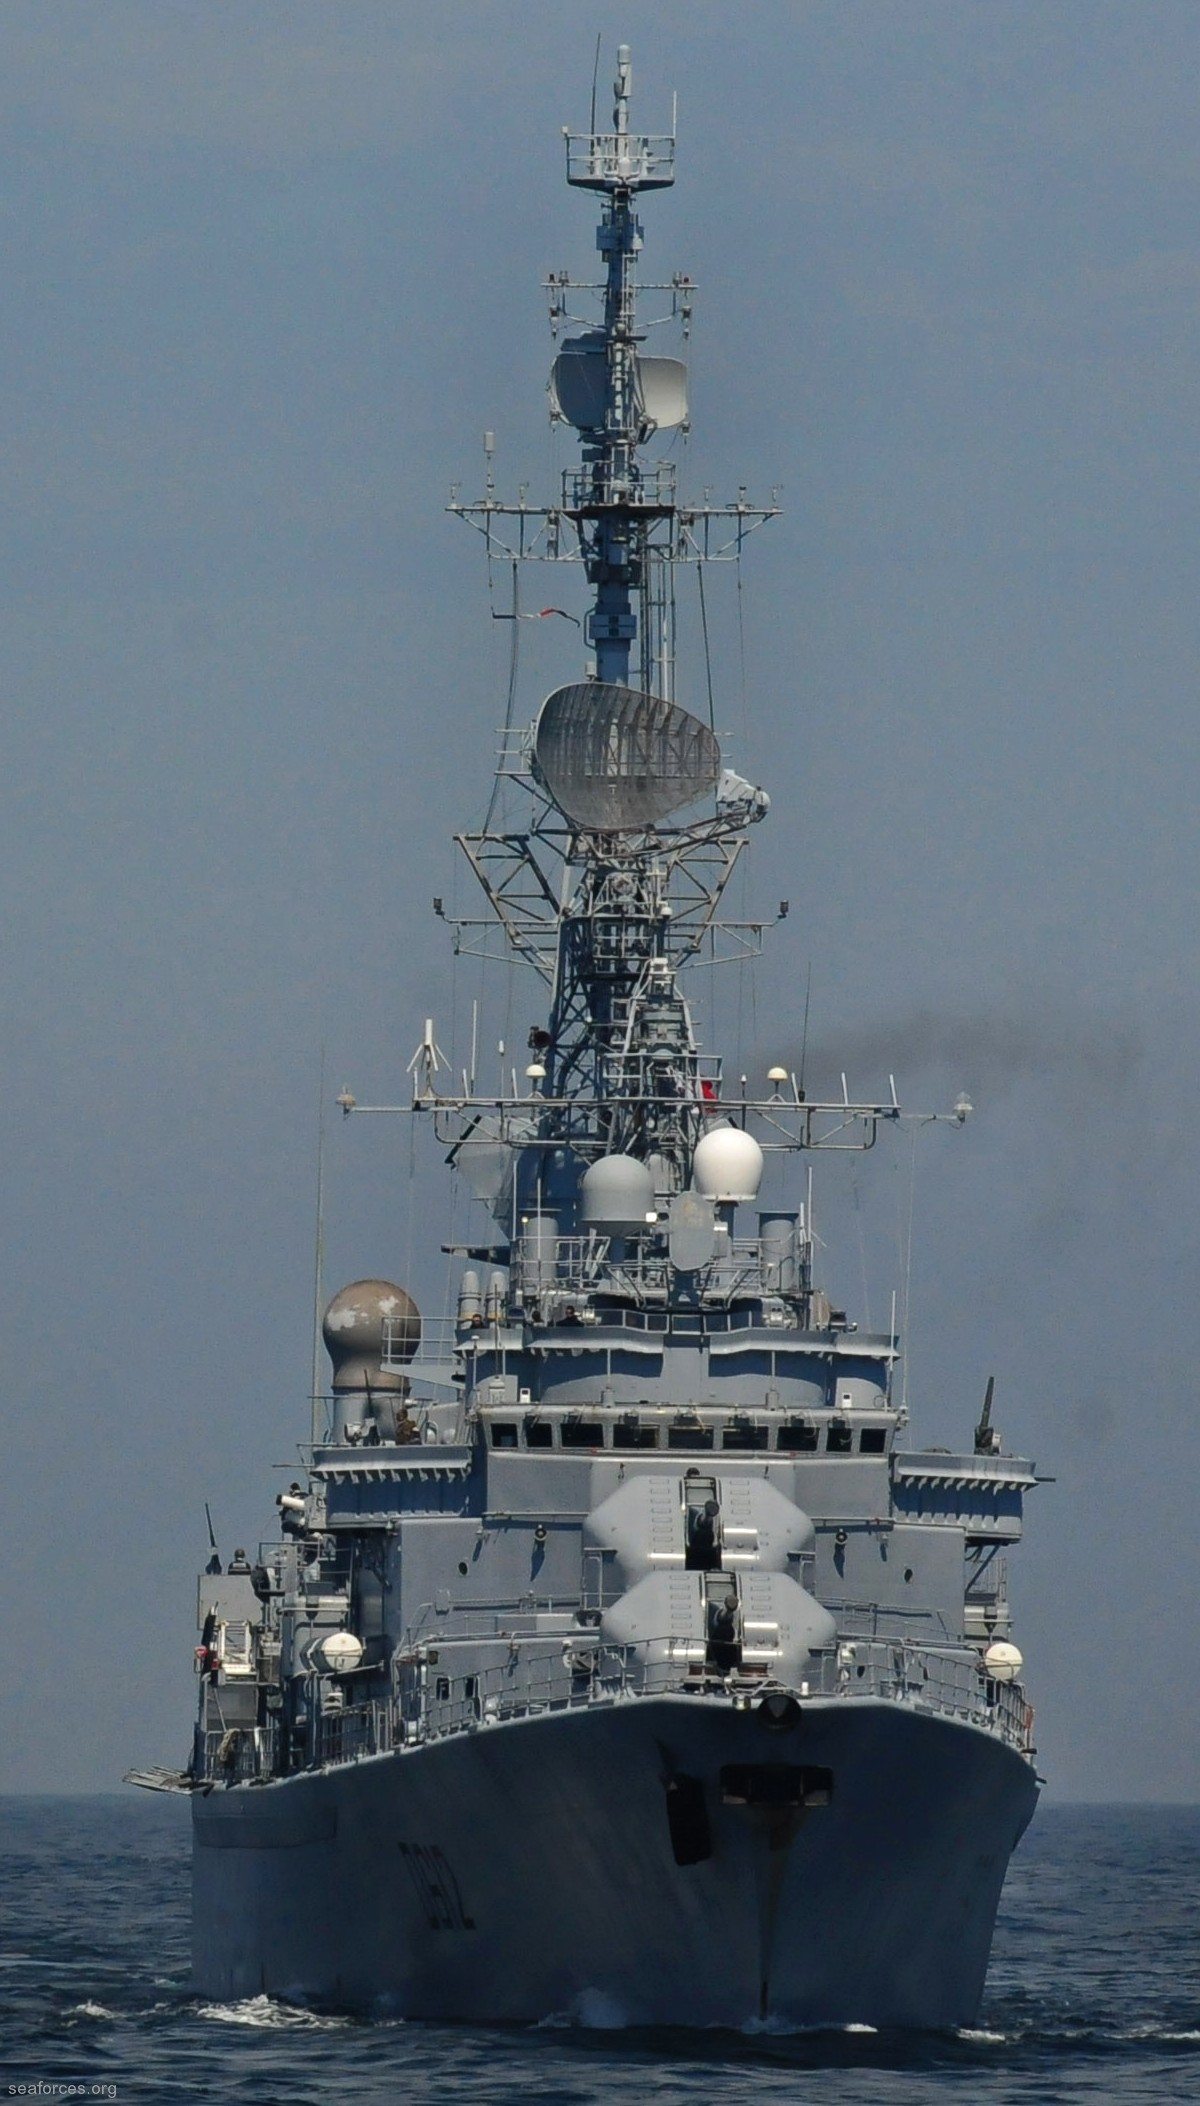 tourville class type f67 asw frigate destroyer french navy marine nationale 02 d-612 de grasse